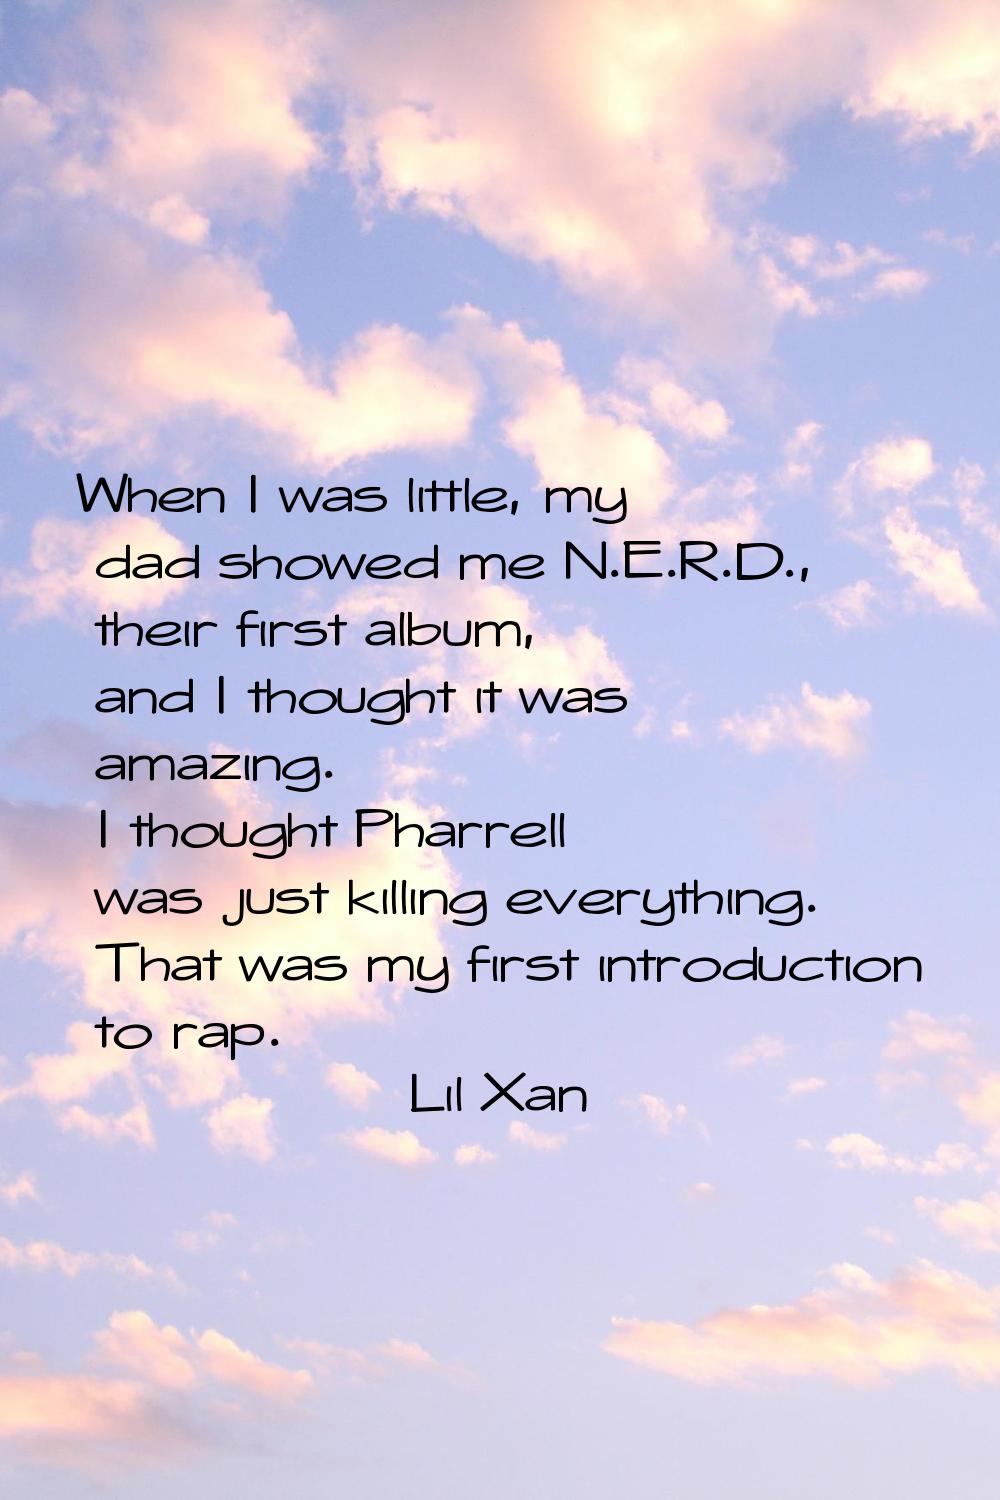 When I was little, my dad showed me N.E.R.D., their first album, and I thought it was amazing. I th